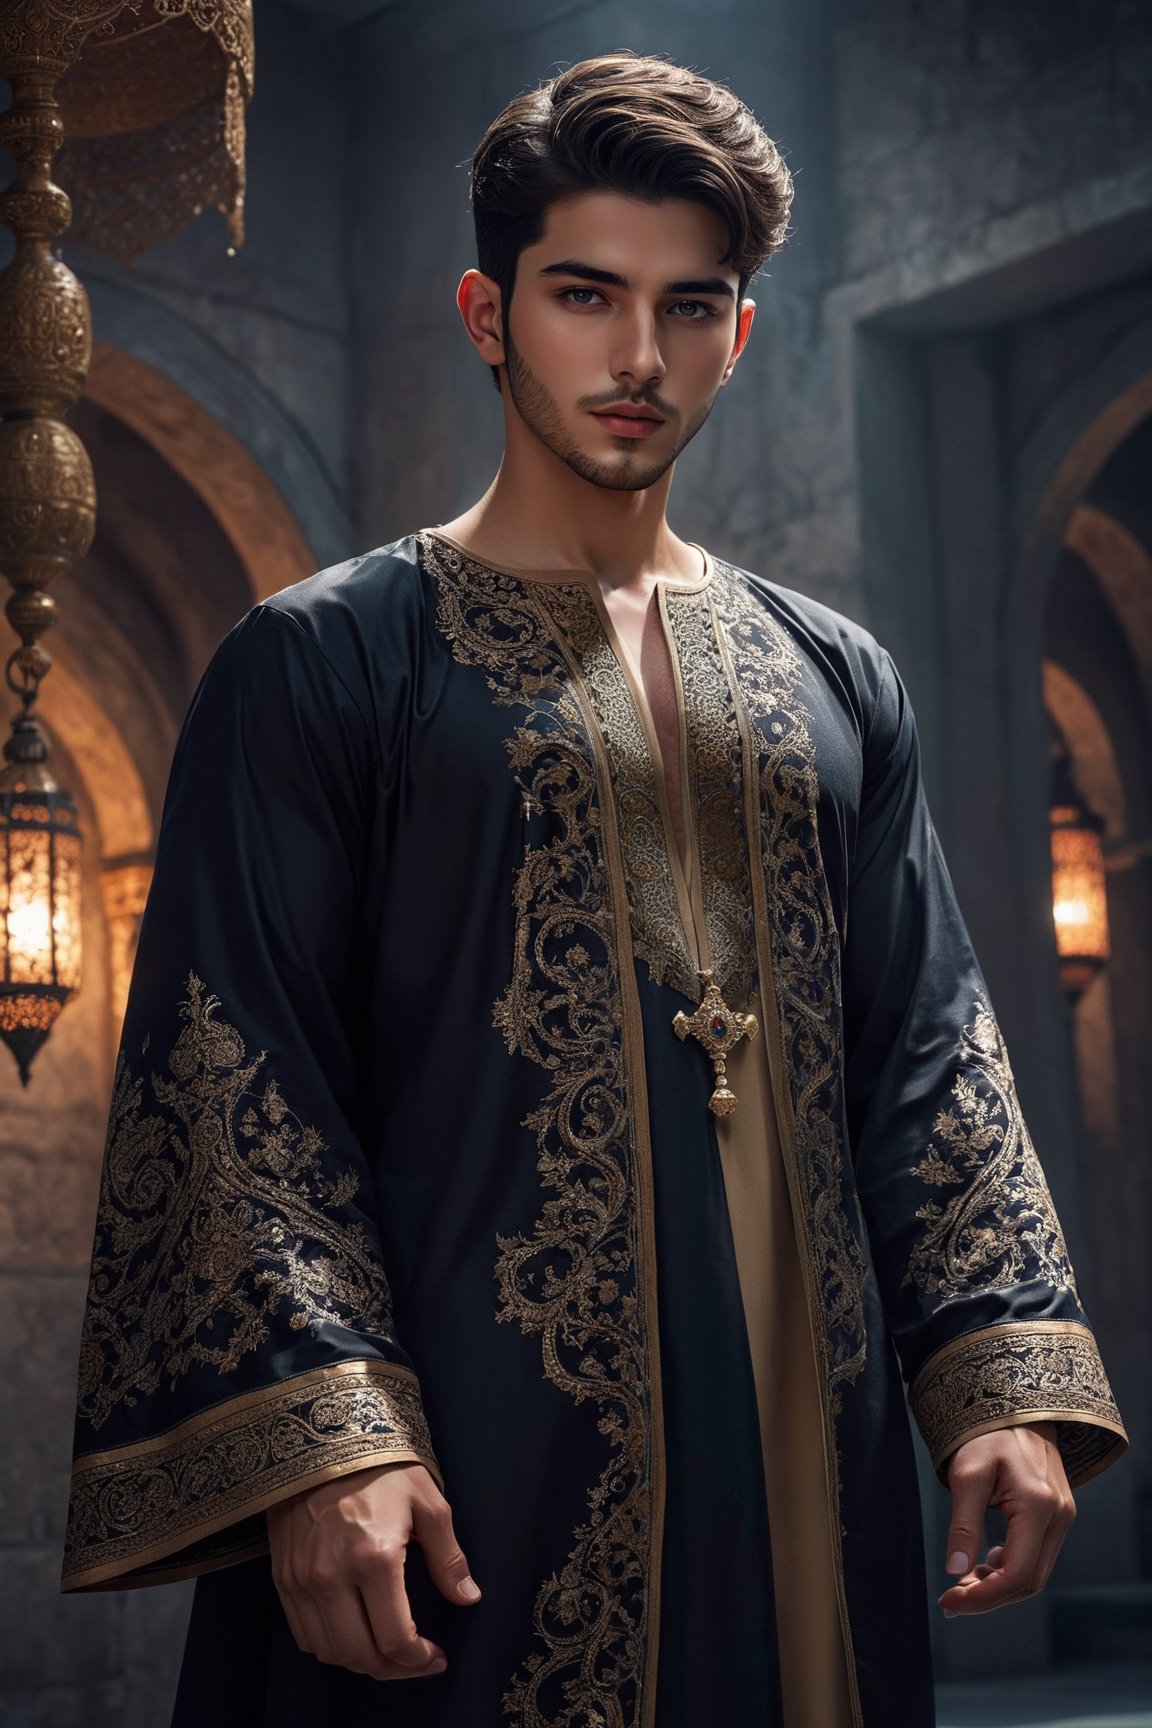 anime style,21 years old  man wearing a black luxurious Middle Eastern thobe, His eyes revealed a look of wisdom and compassion, and he exuded the aura of mystery and sainthood, in a place full of mystical atmosphere,Depth and Dimension in the Pupils,So beautiful eyes,(beard:1.5),
Envision the thobe with intricate details, featuring opulent embroidery, rich fabrics, and elaborate patterns, Picture the boy adorned in a palette of vibrant colors, reflecting the elegance and craftsmanship of traditional Middle Eastern attire. Optimize for a visually captivating composition that highlights the exquisite design of the thobe, creating a scene that celebrates the beauty of cultural richness,Anime ,Dwarven City